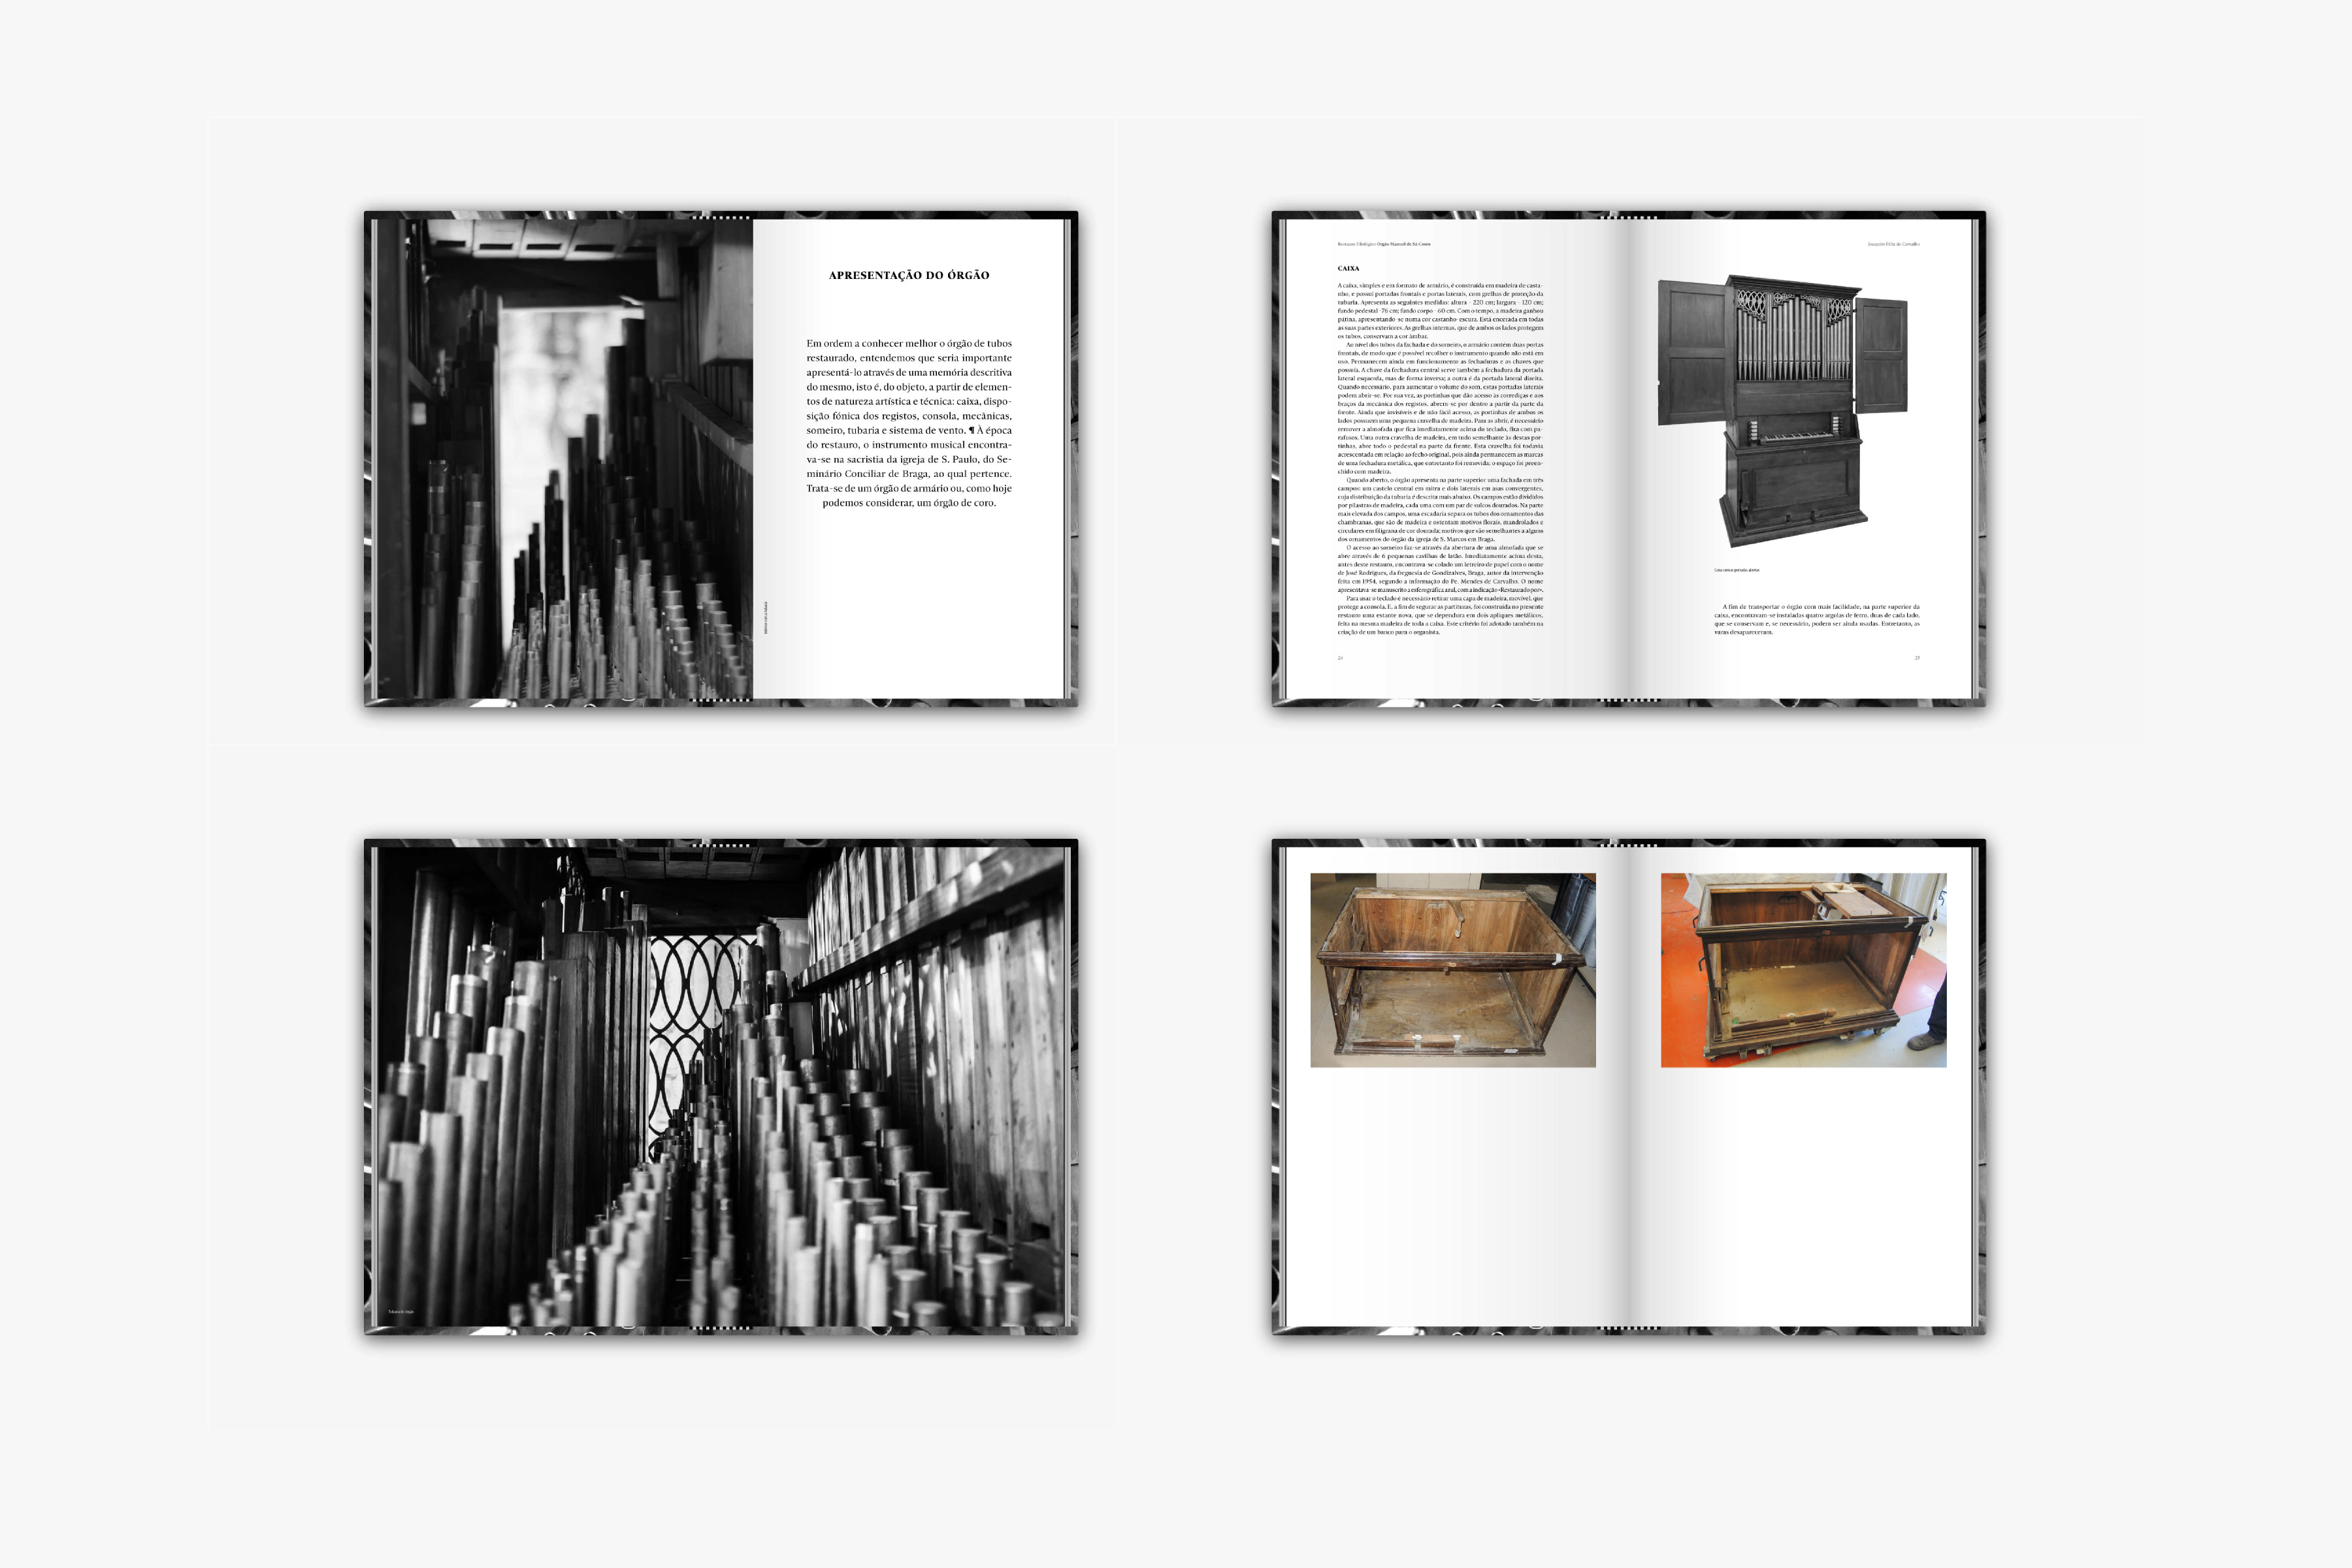 Book Philological Restoration - Pipe Organ by Afonso Designers - Creative Work - $i